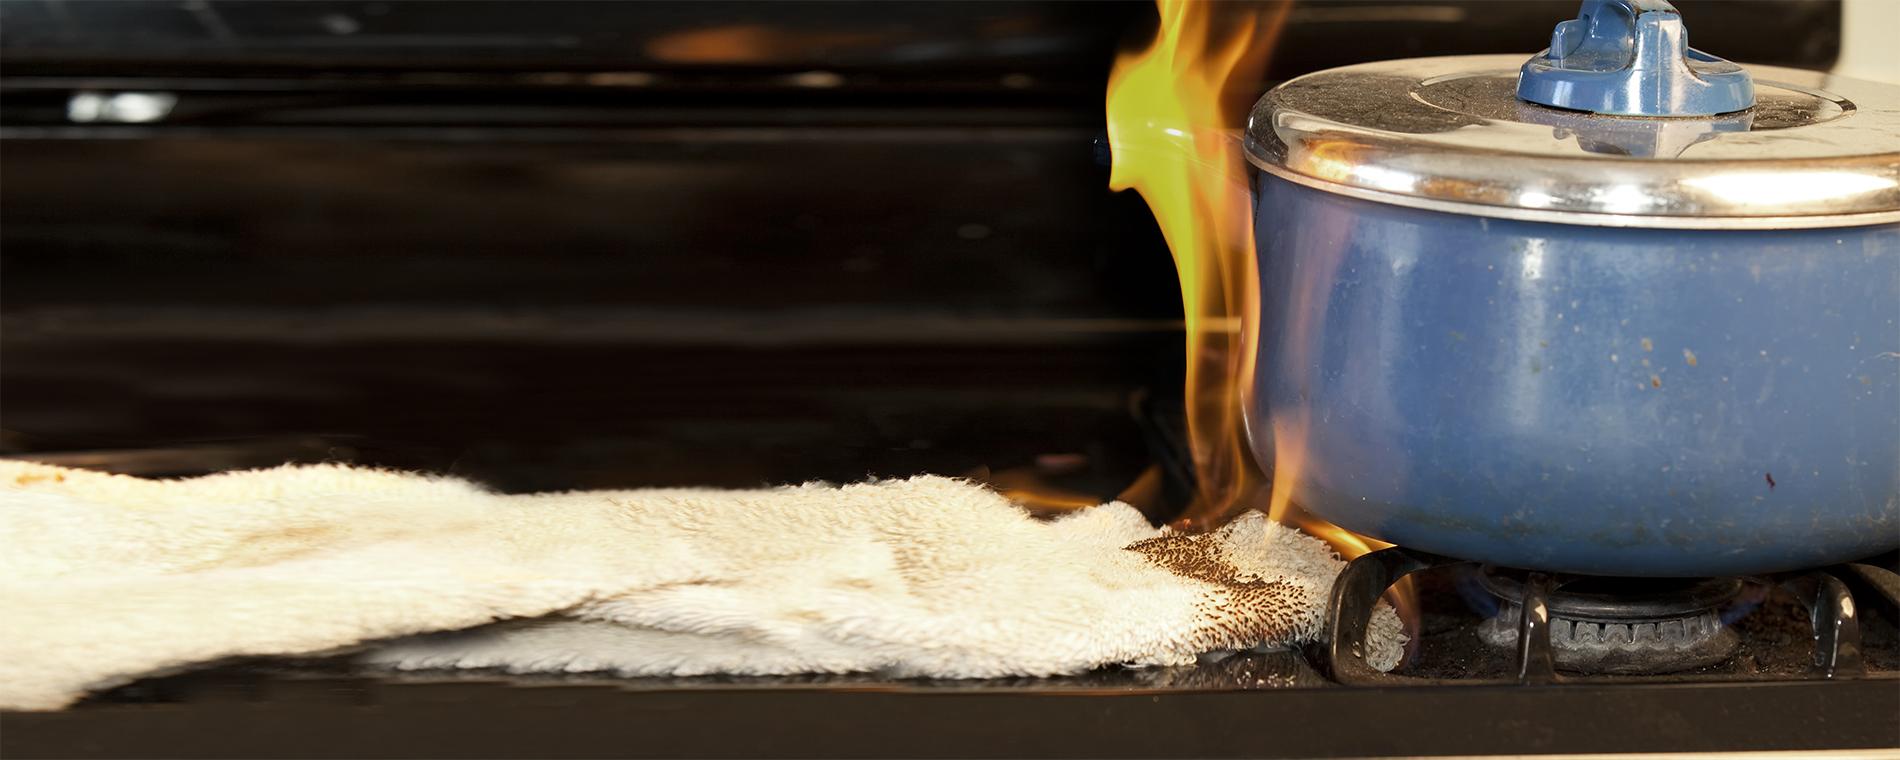 Keep flammable items away from stove tops 